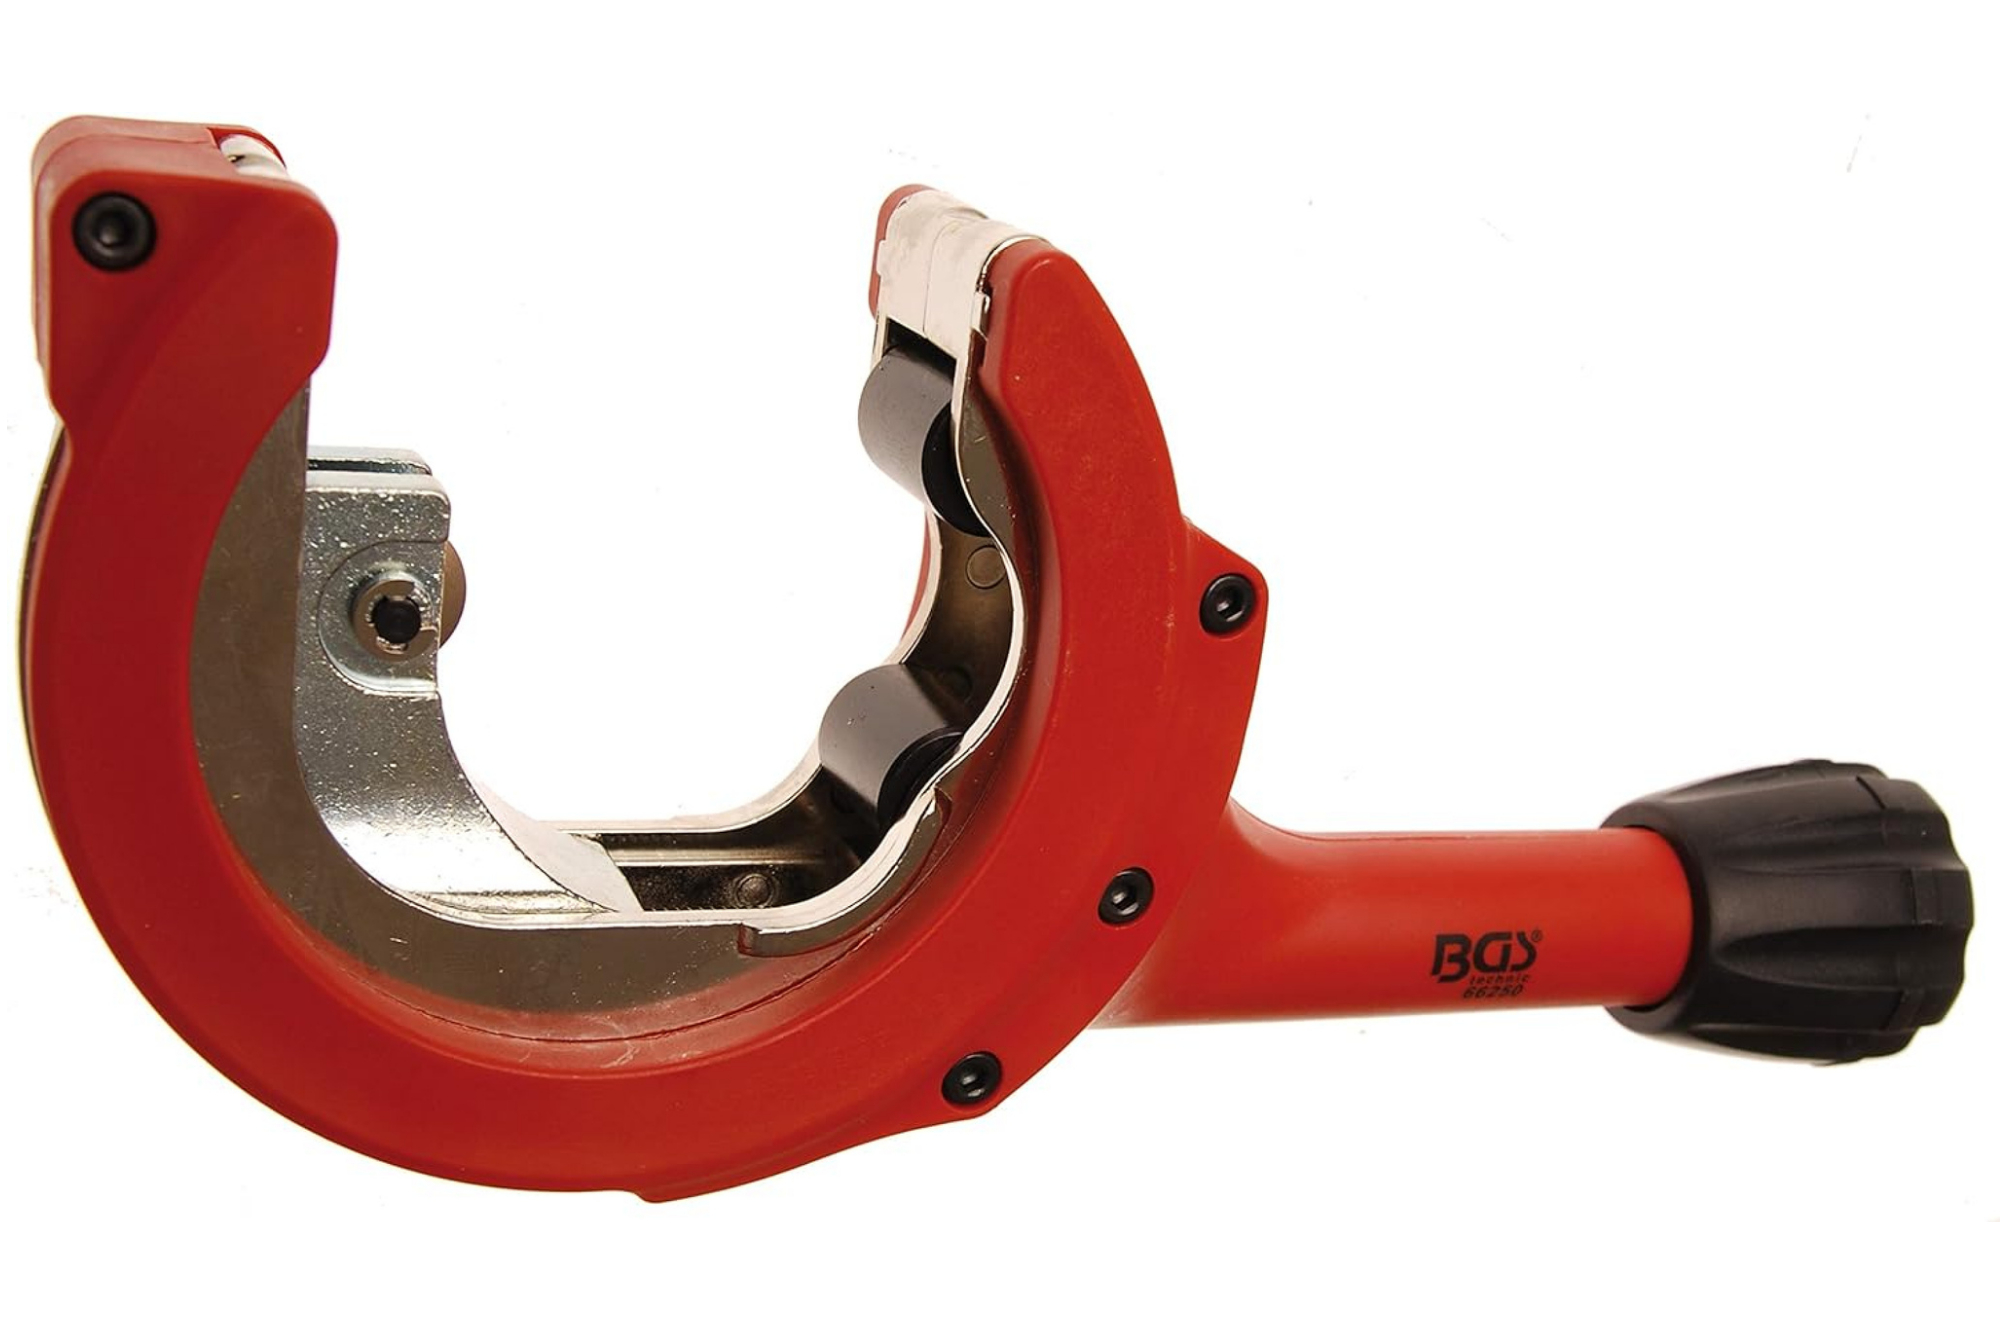 How Do You Use A Ratchet Pipe Cutter?